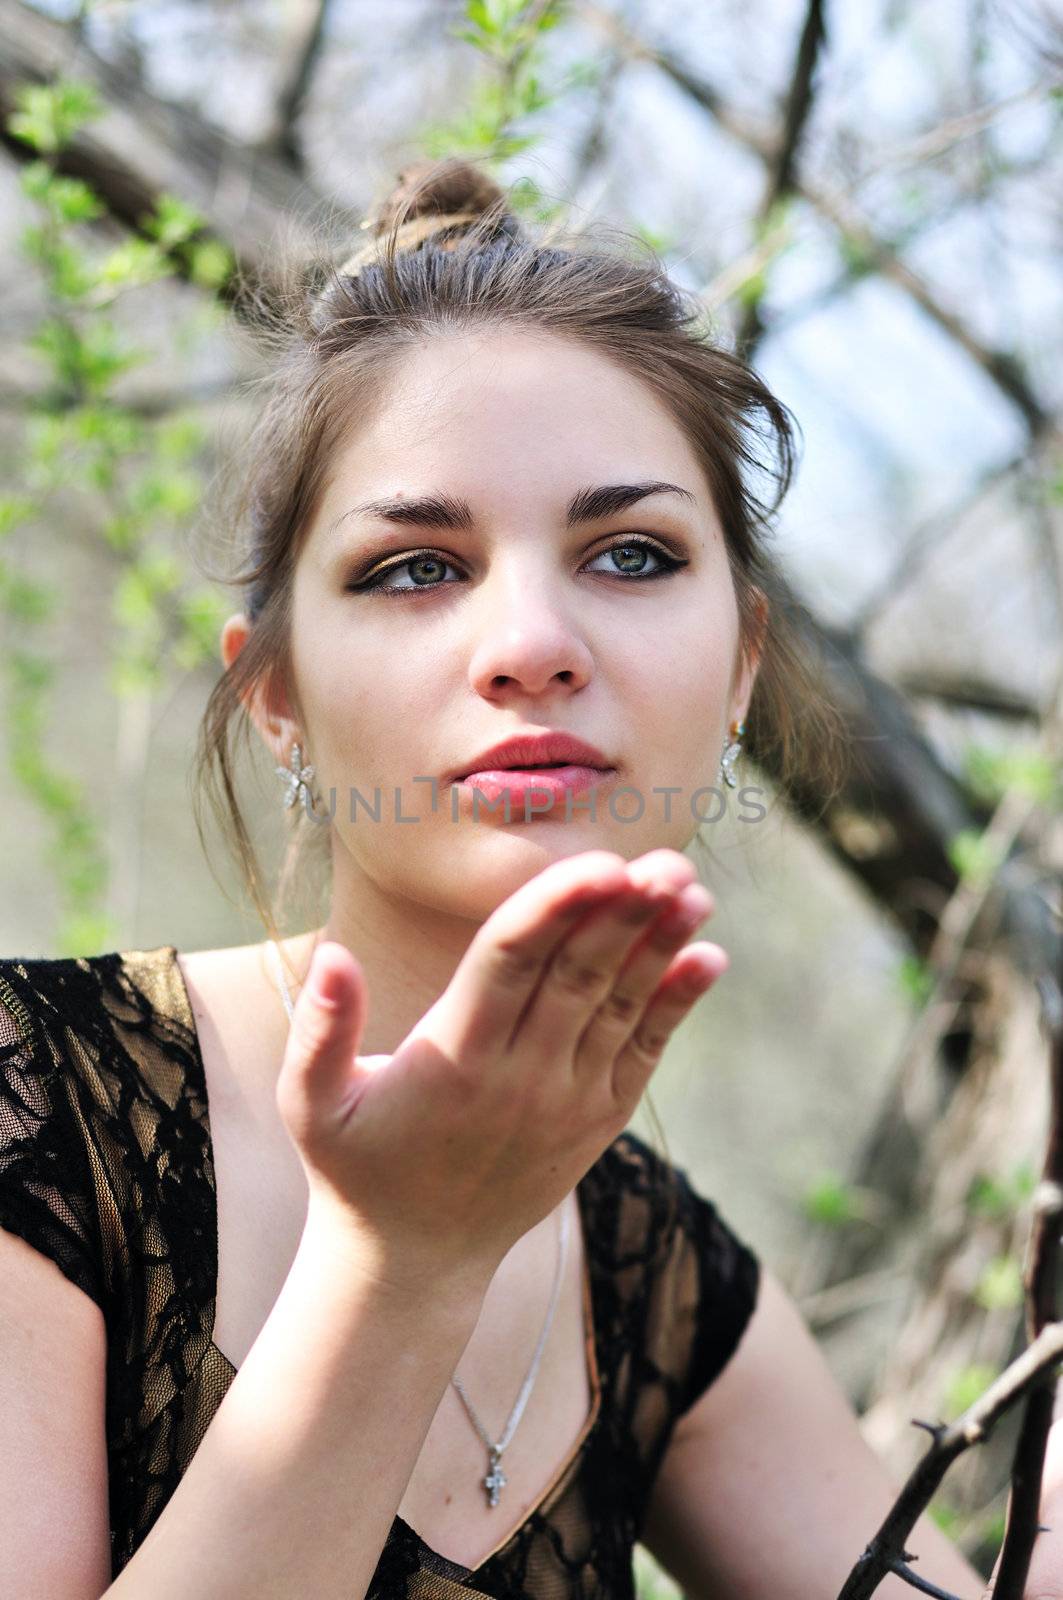  Young pretty teen girl blowing a kiss